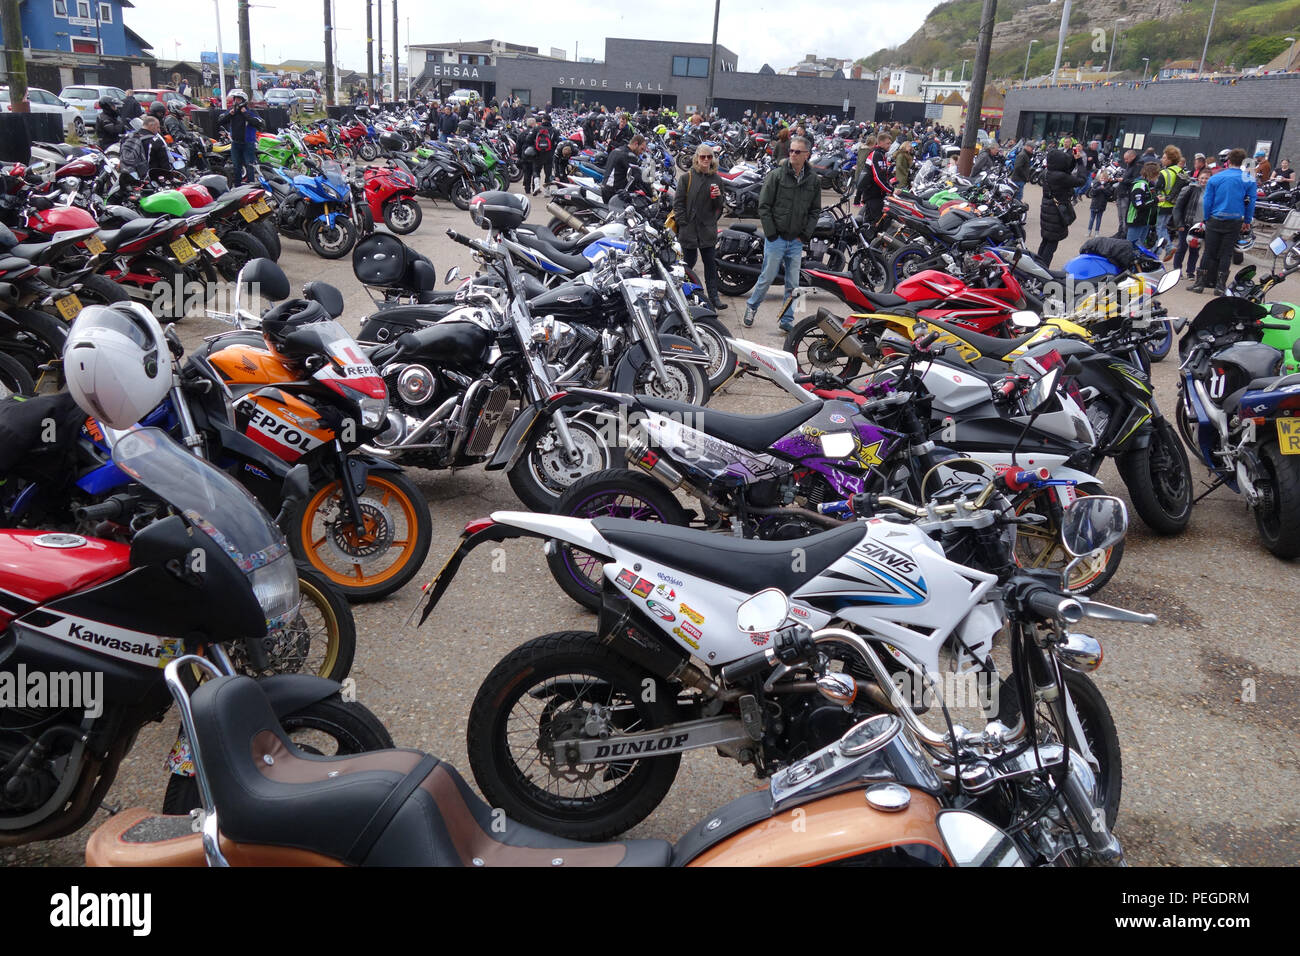 Annual May day bike run, 1 May 2017, Hastings, East Sussex United Kingdom Stock Photo